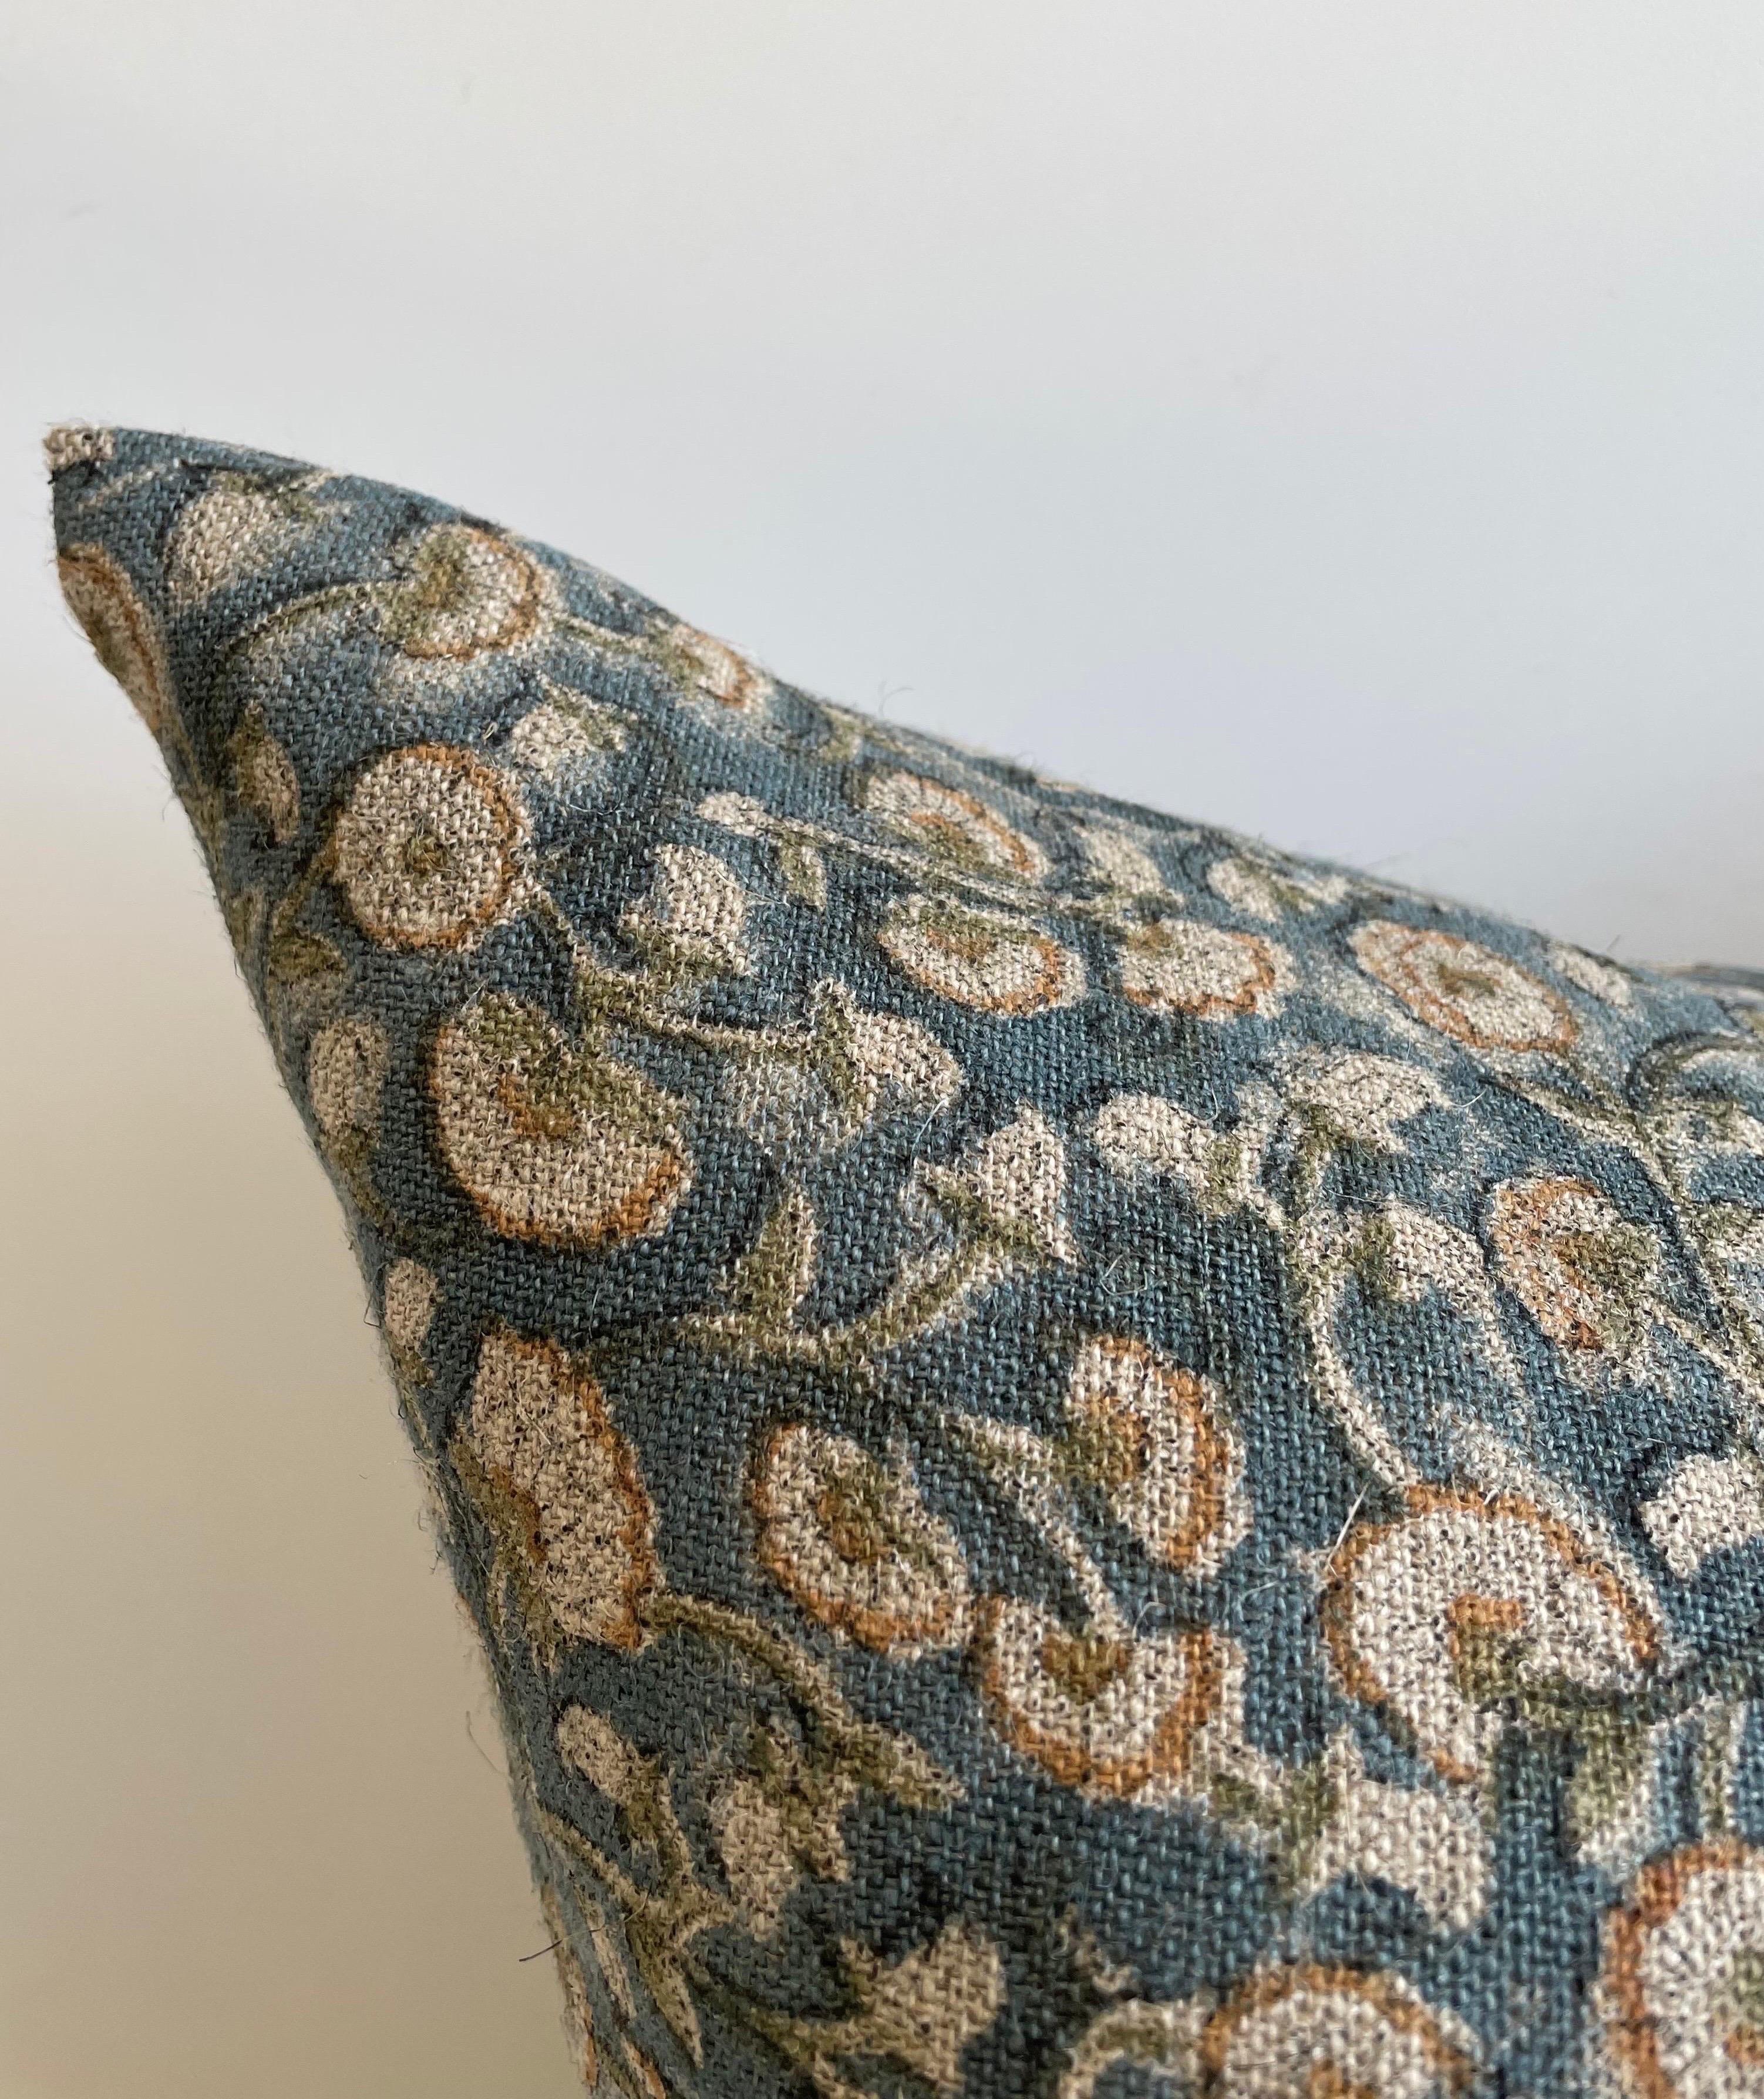 Beautifully hand block-printed pillow on heavy linen fabric. Zipper closure. Care instructions: dry clean recommended 
Includes down insert.
Colors: French blue, gold (marigold), on flax natural linen.
Size: 22” x 22”.

Please allow 6-10 weeks from